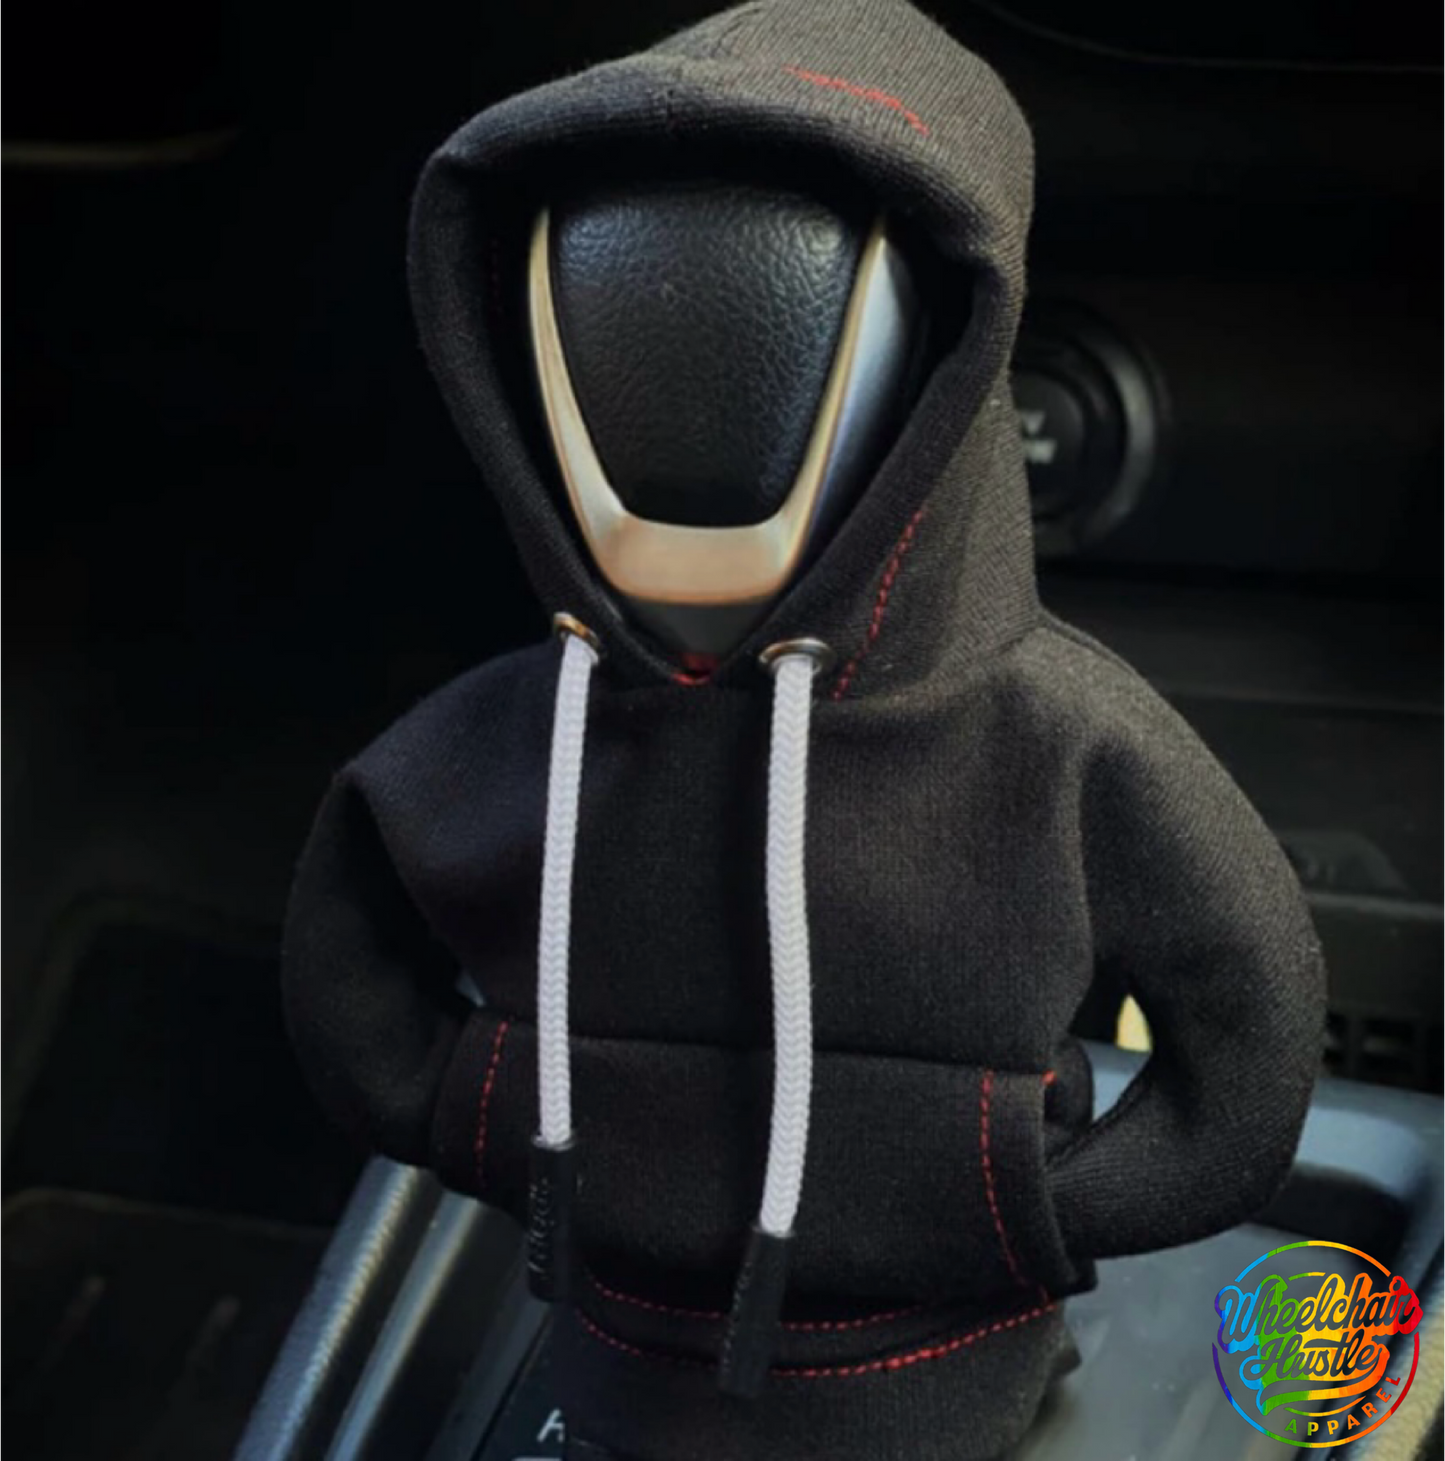 Gear Shift Hoodie Cover Shift Cover